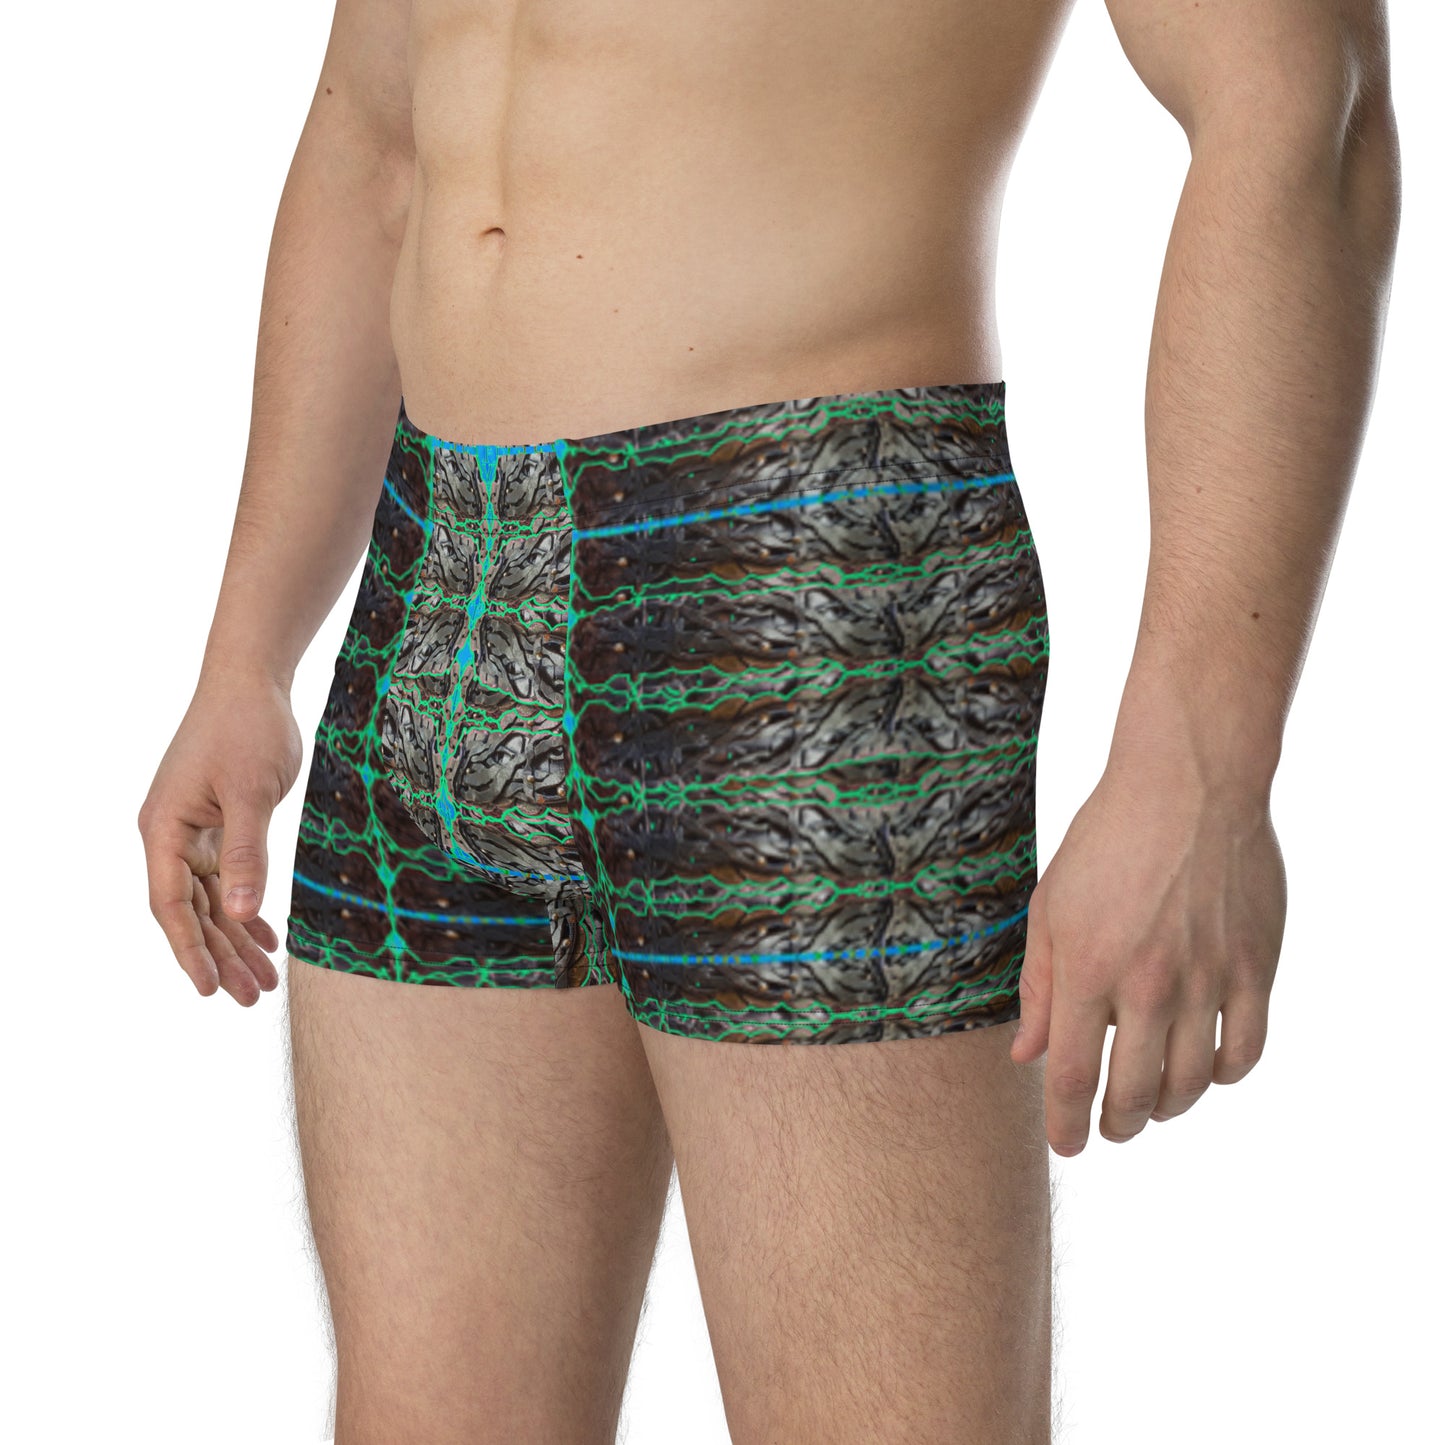 Boxer Briefs (His/They)(Rind#10Tree Link) RJSTH@Fabric#10 RJSTHW2021 RJS